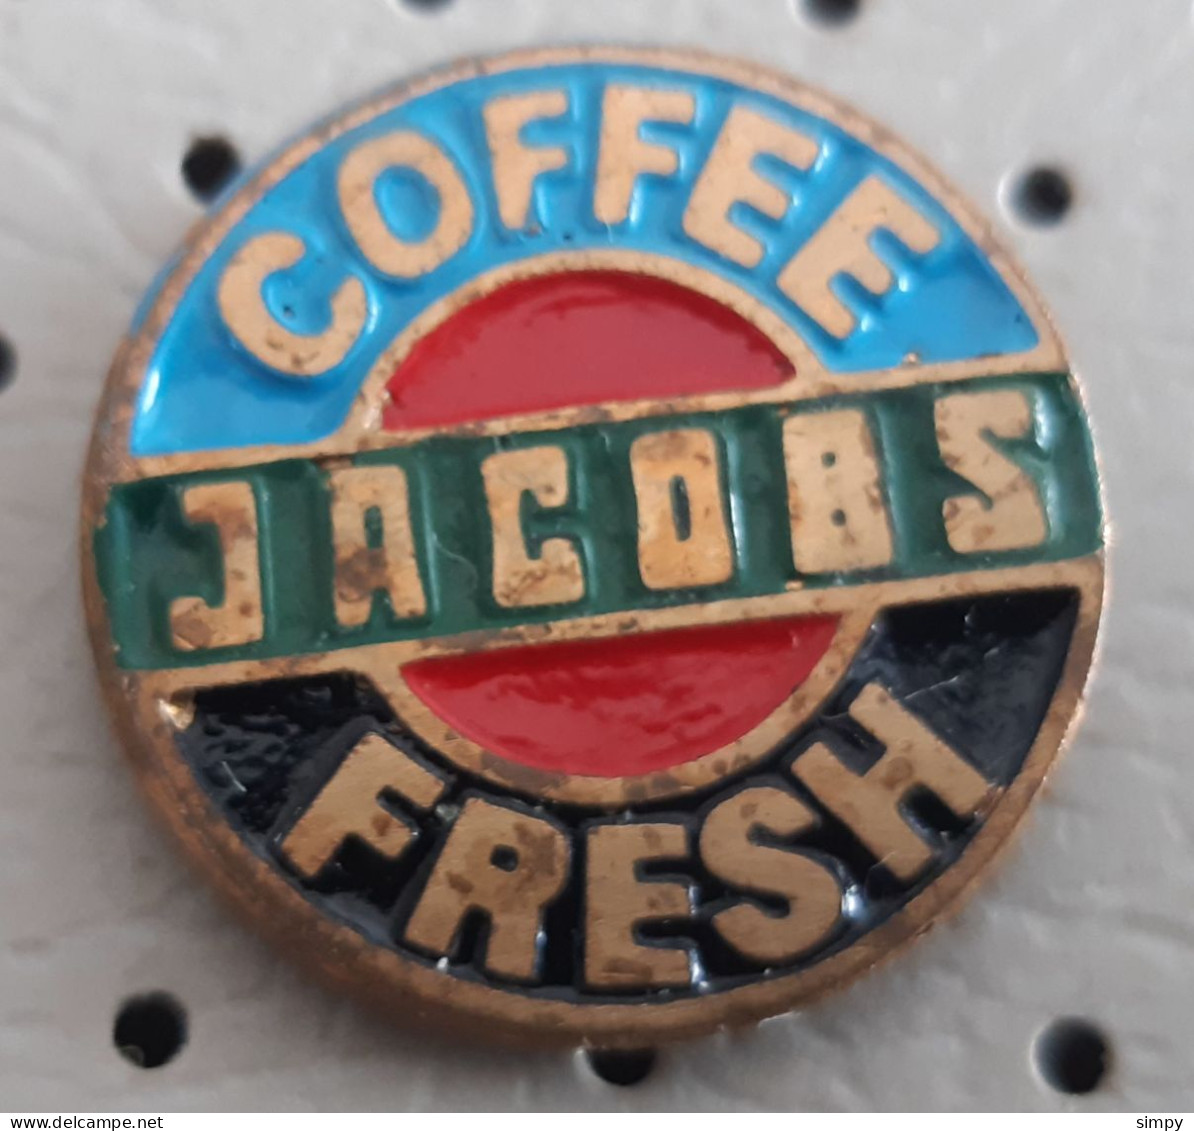 JACOBS Fresh Coffee Cafe Kaffe Caffe  Germany  Pin - Beverages